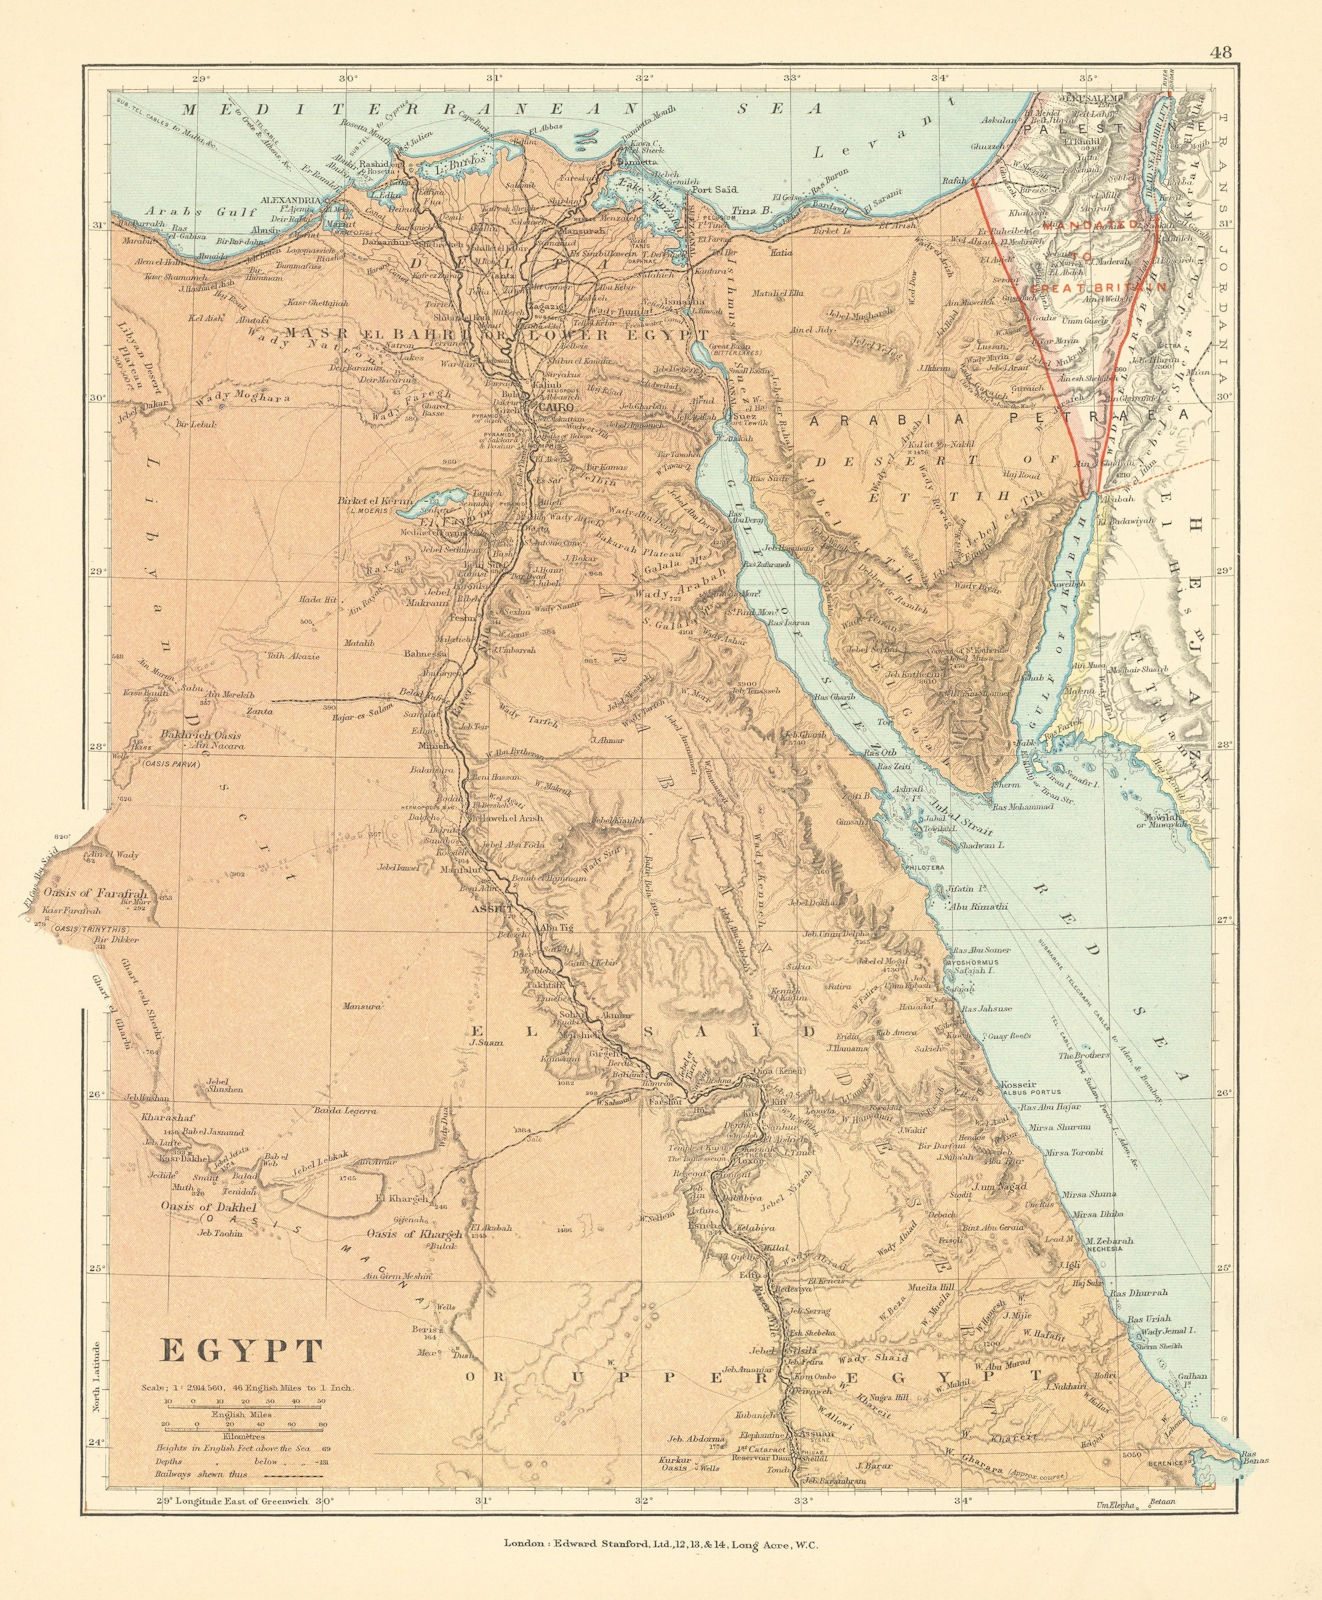 Egypt. Nile Valley. Gulf of Suez. Red Sea. STANFORD c1925 old vintage map